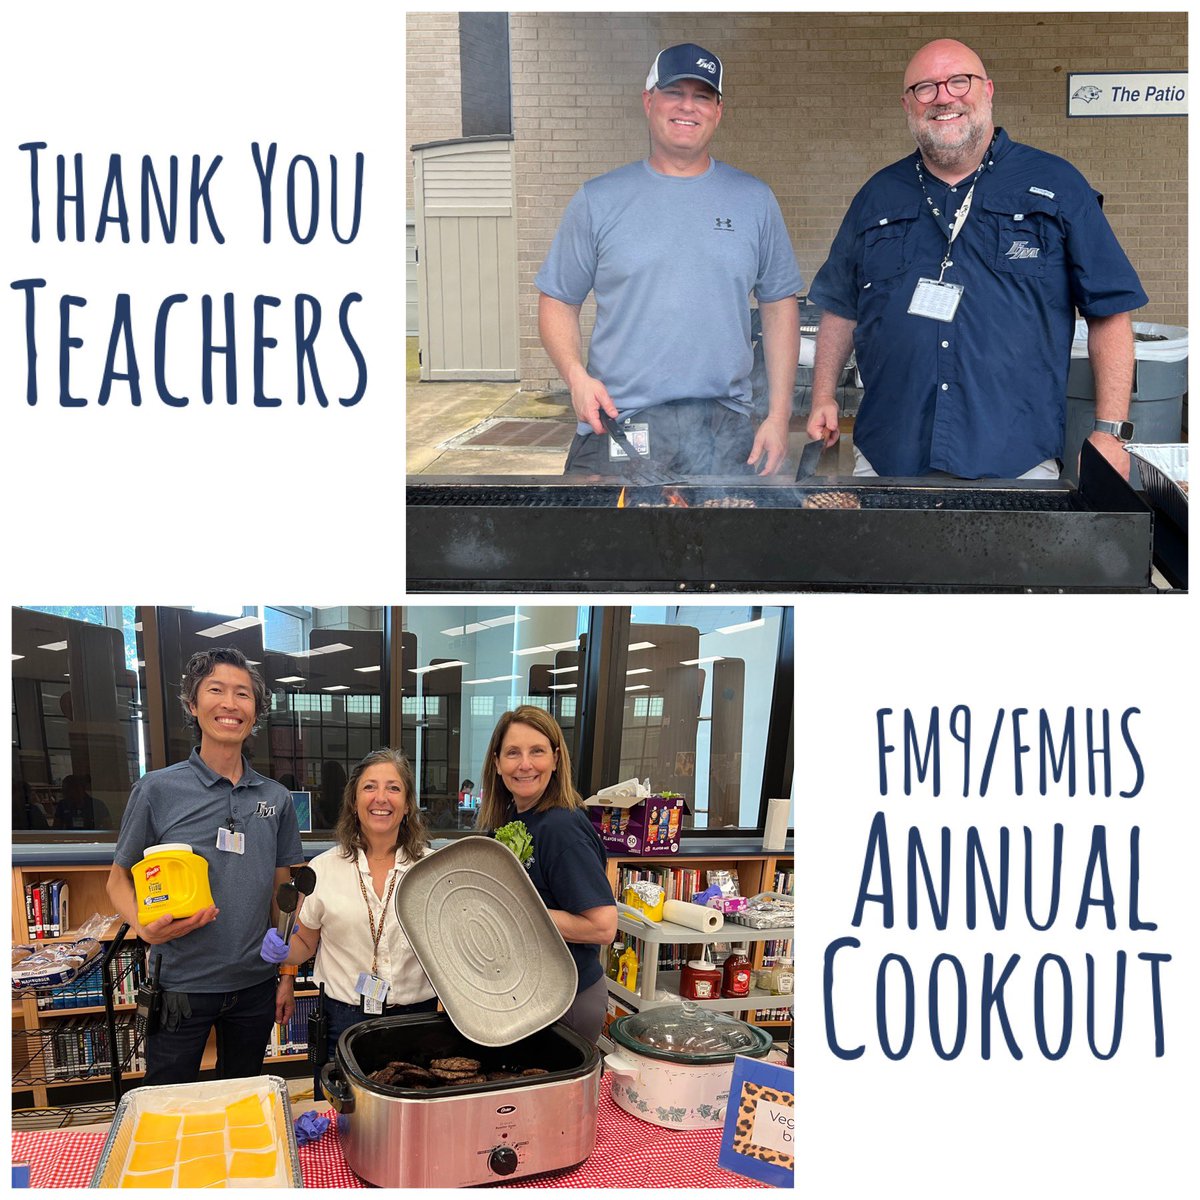 One of the BEST DAYS of the year … Mr. Brown & Mr. Russell grilling up lunch for FM9/FMHS teachers & staff! #TeacherAppreciationWeek @FlowerMoundHS